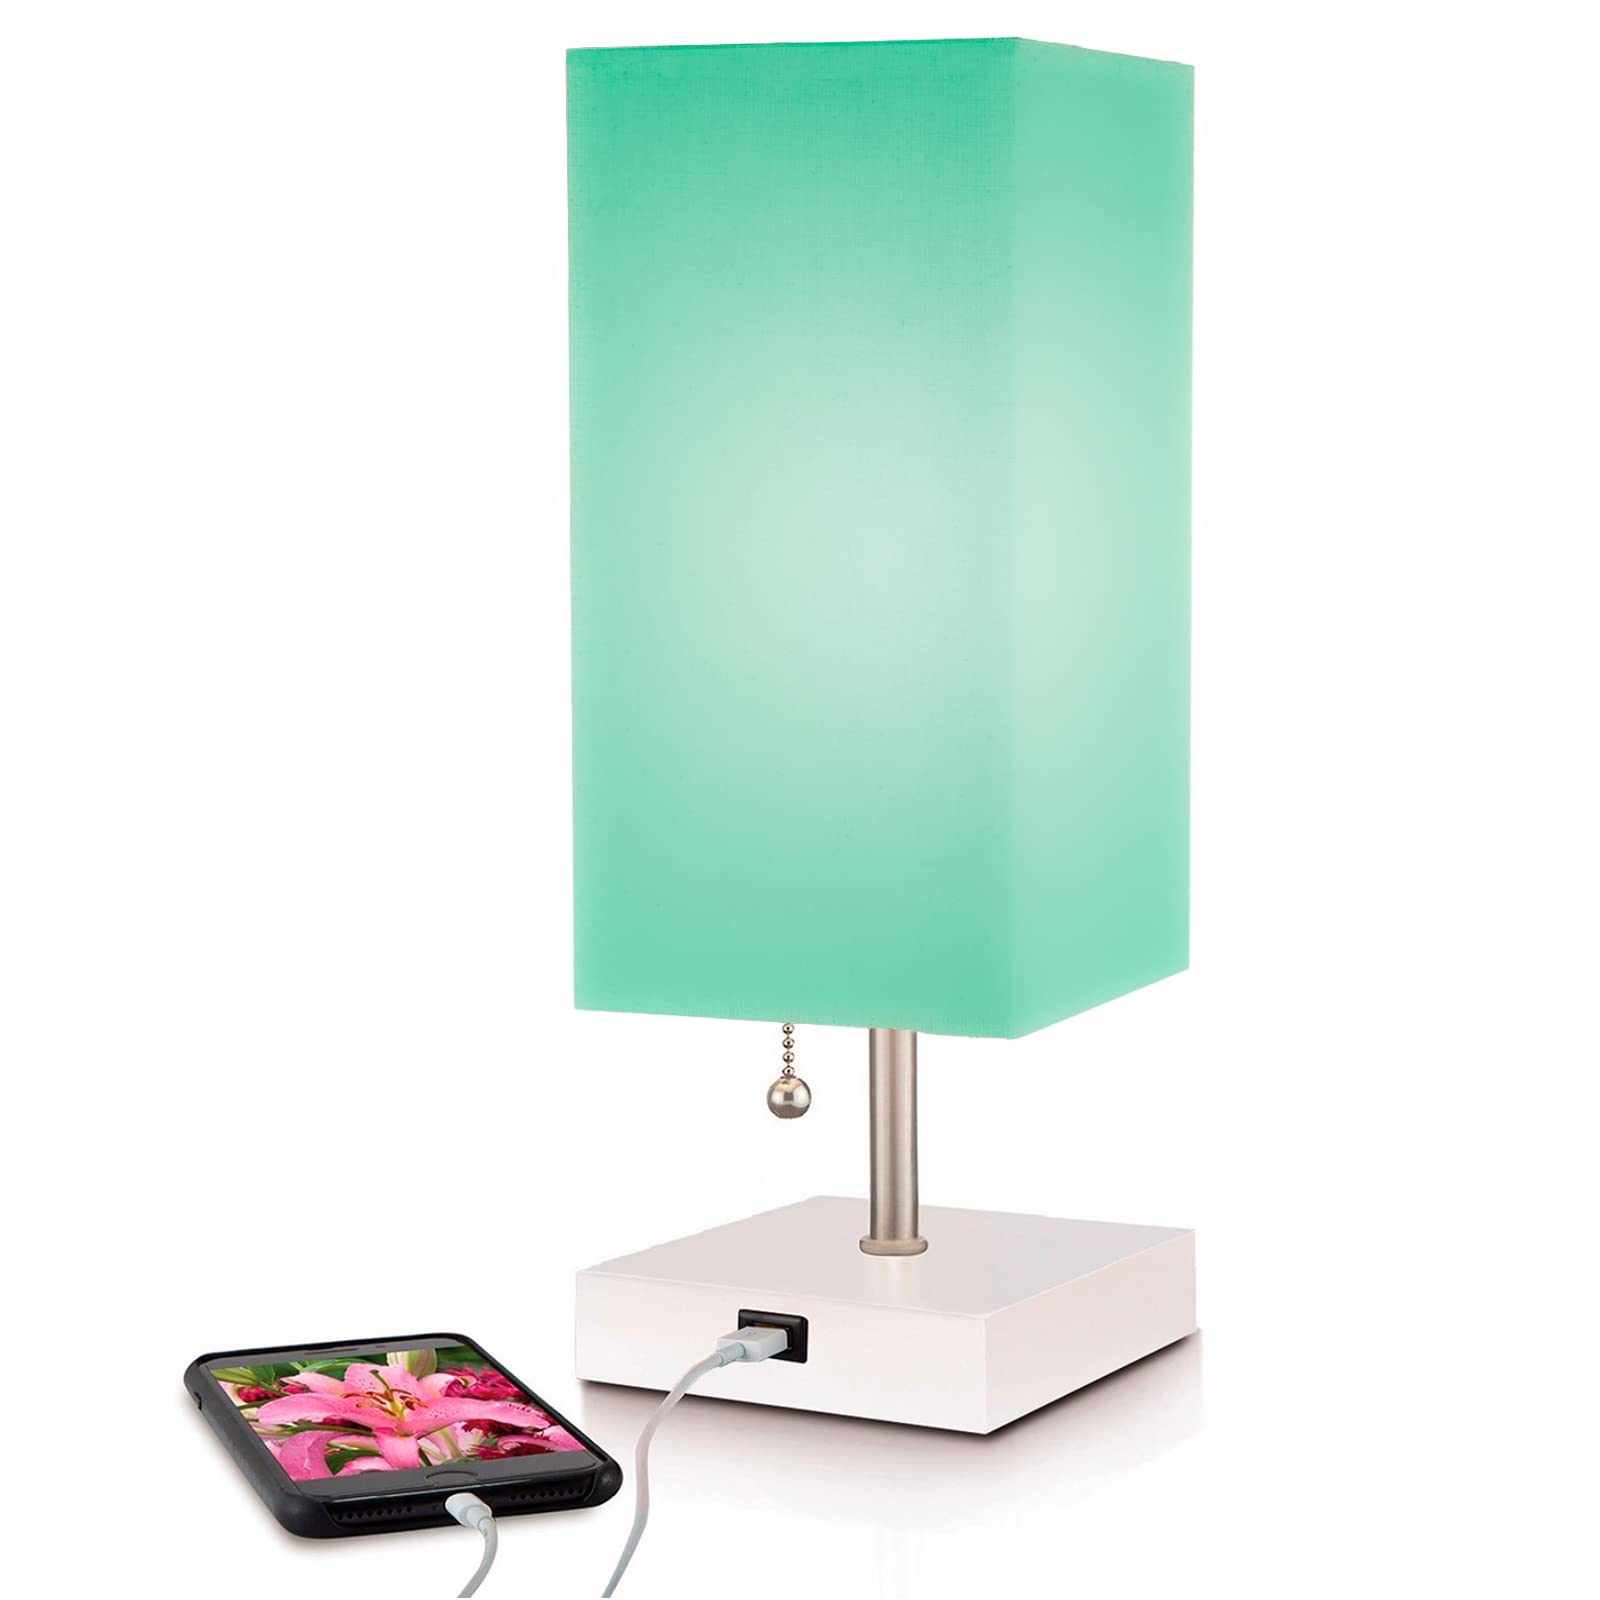 Book Cover Modern Teal Aqua Small Table Lamp w USB Quick Charging Port, Great for LED Bedside, Desk, Bedroom, and Nightstand Lamps or Other Table Lights by MissionMax